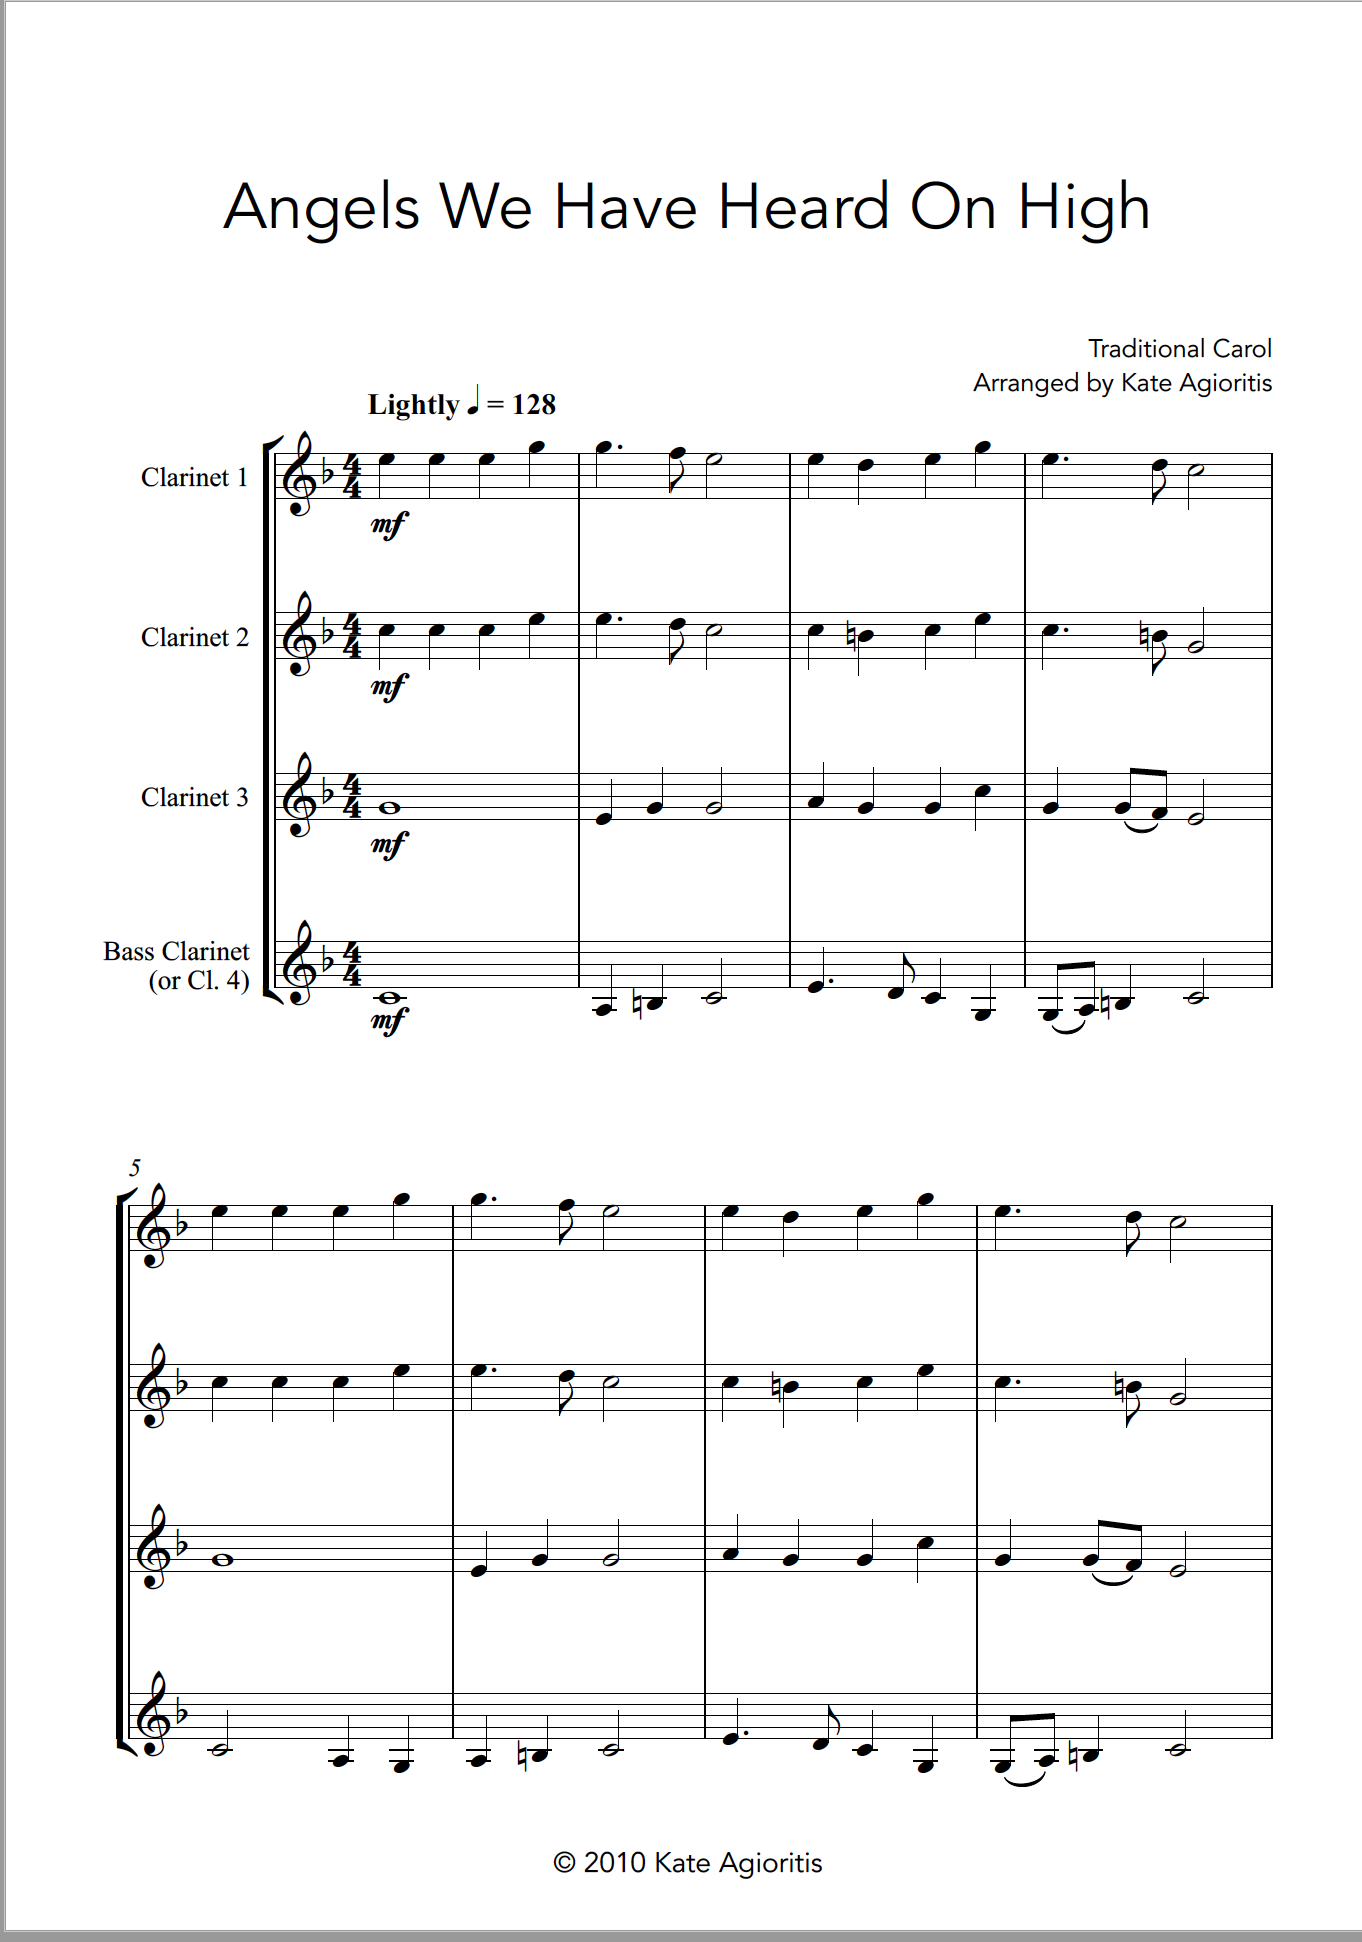 Angels We Have Heard On High – from ‘Carols for Four’ – Clarinet Quartet